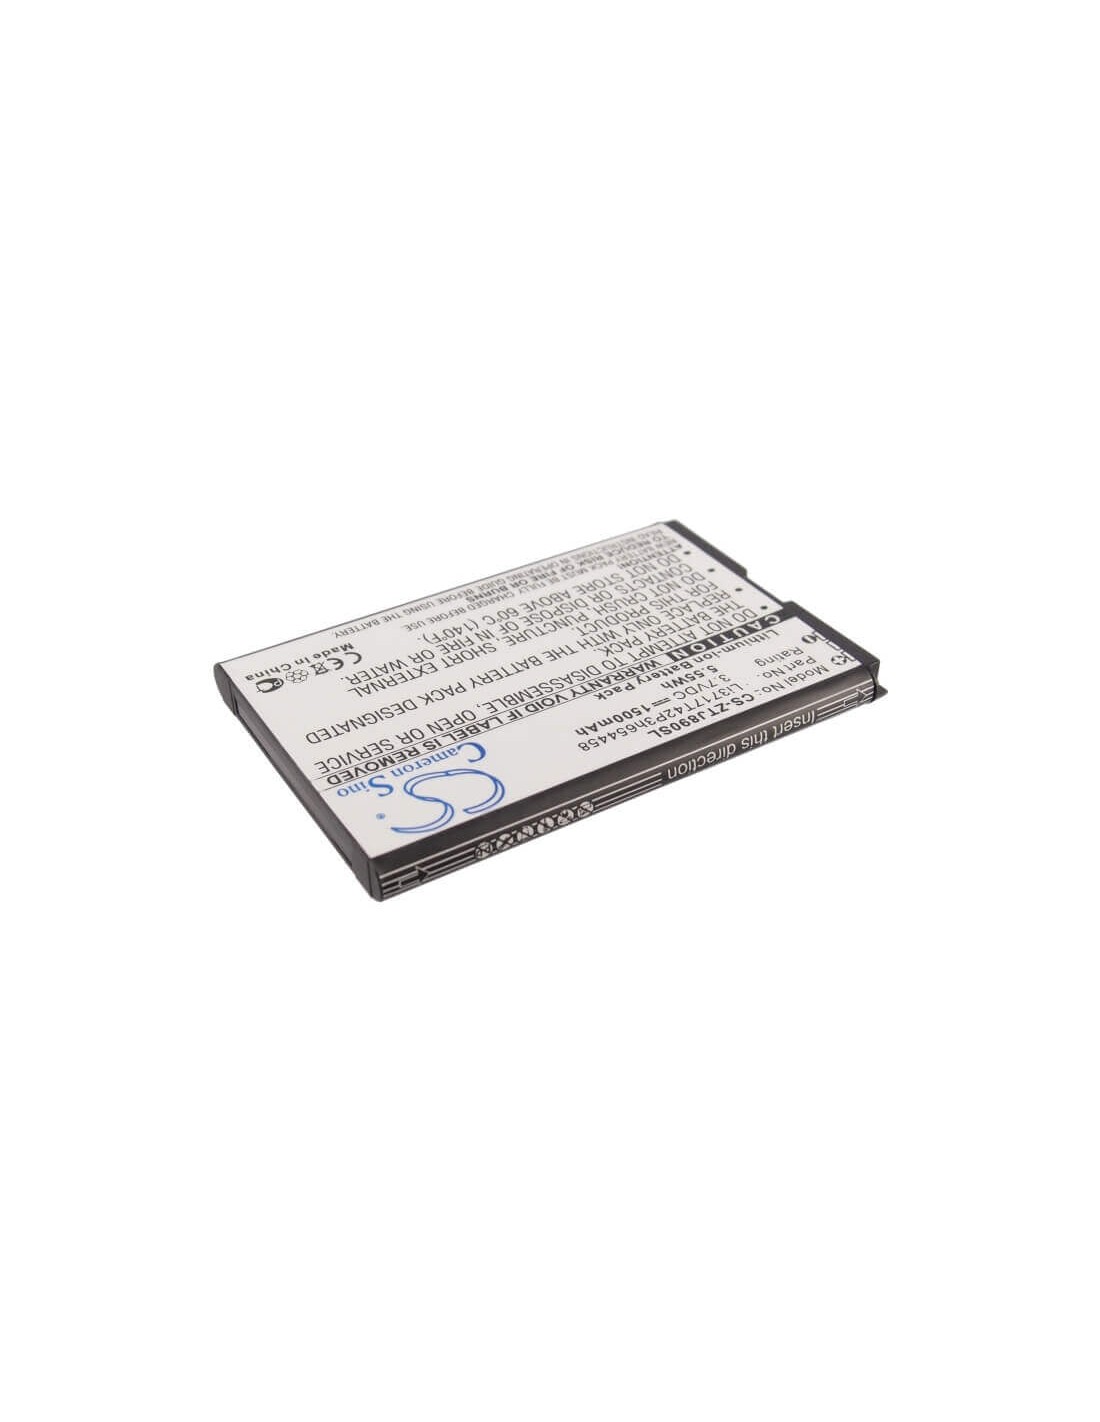 Battery for Zte Authentic, Eufi890, Mf63 3.7V, 1500mAh - 5.55Wh